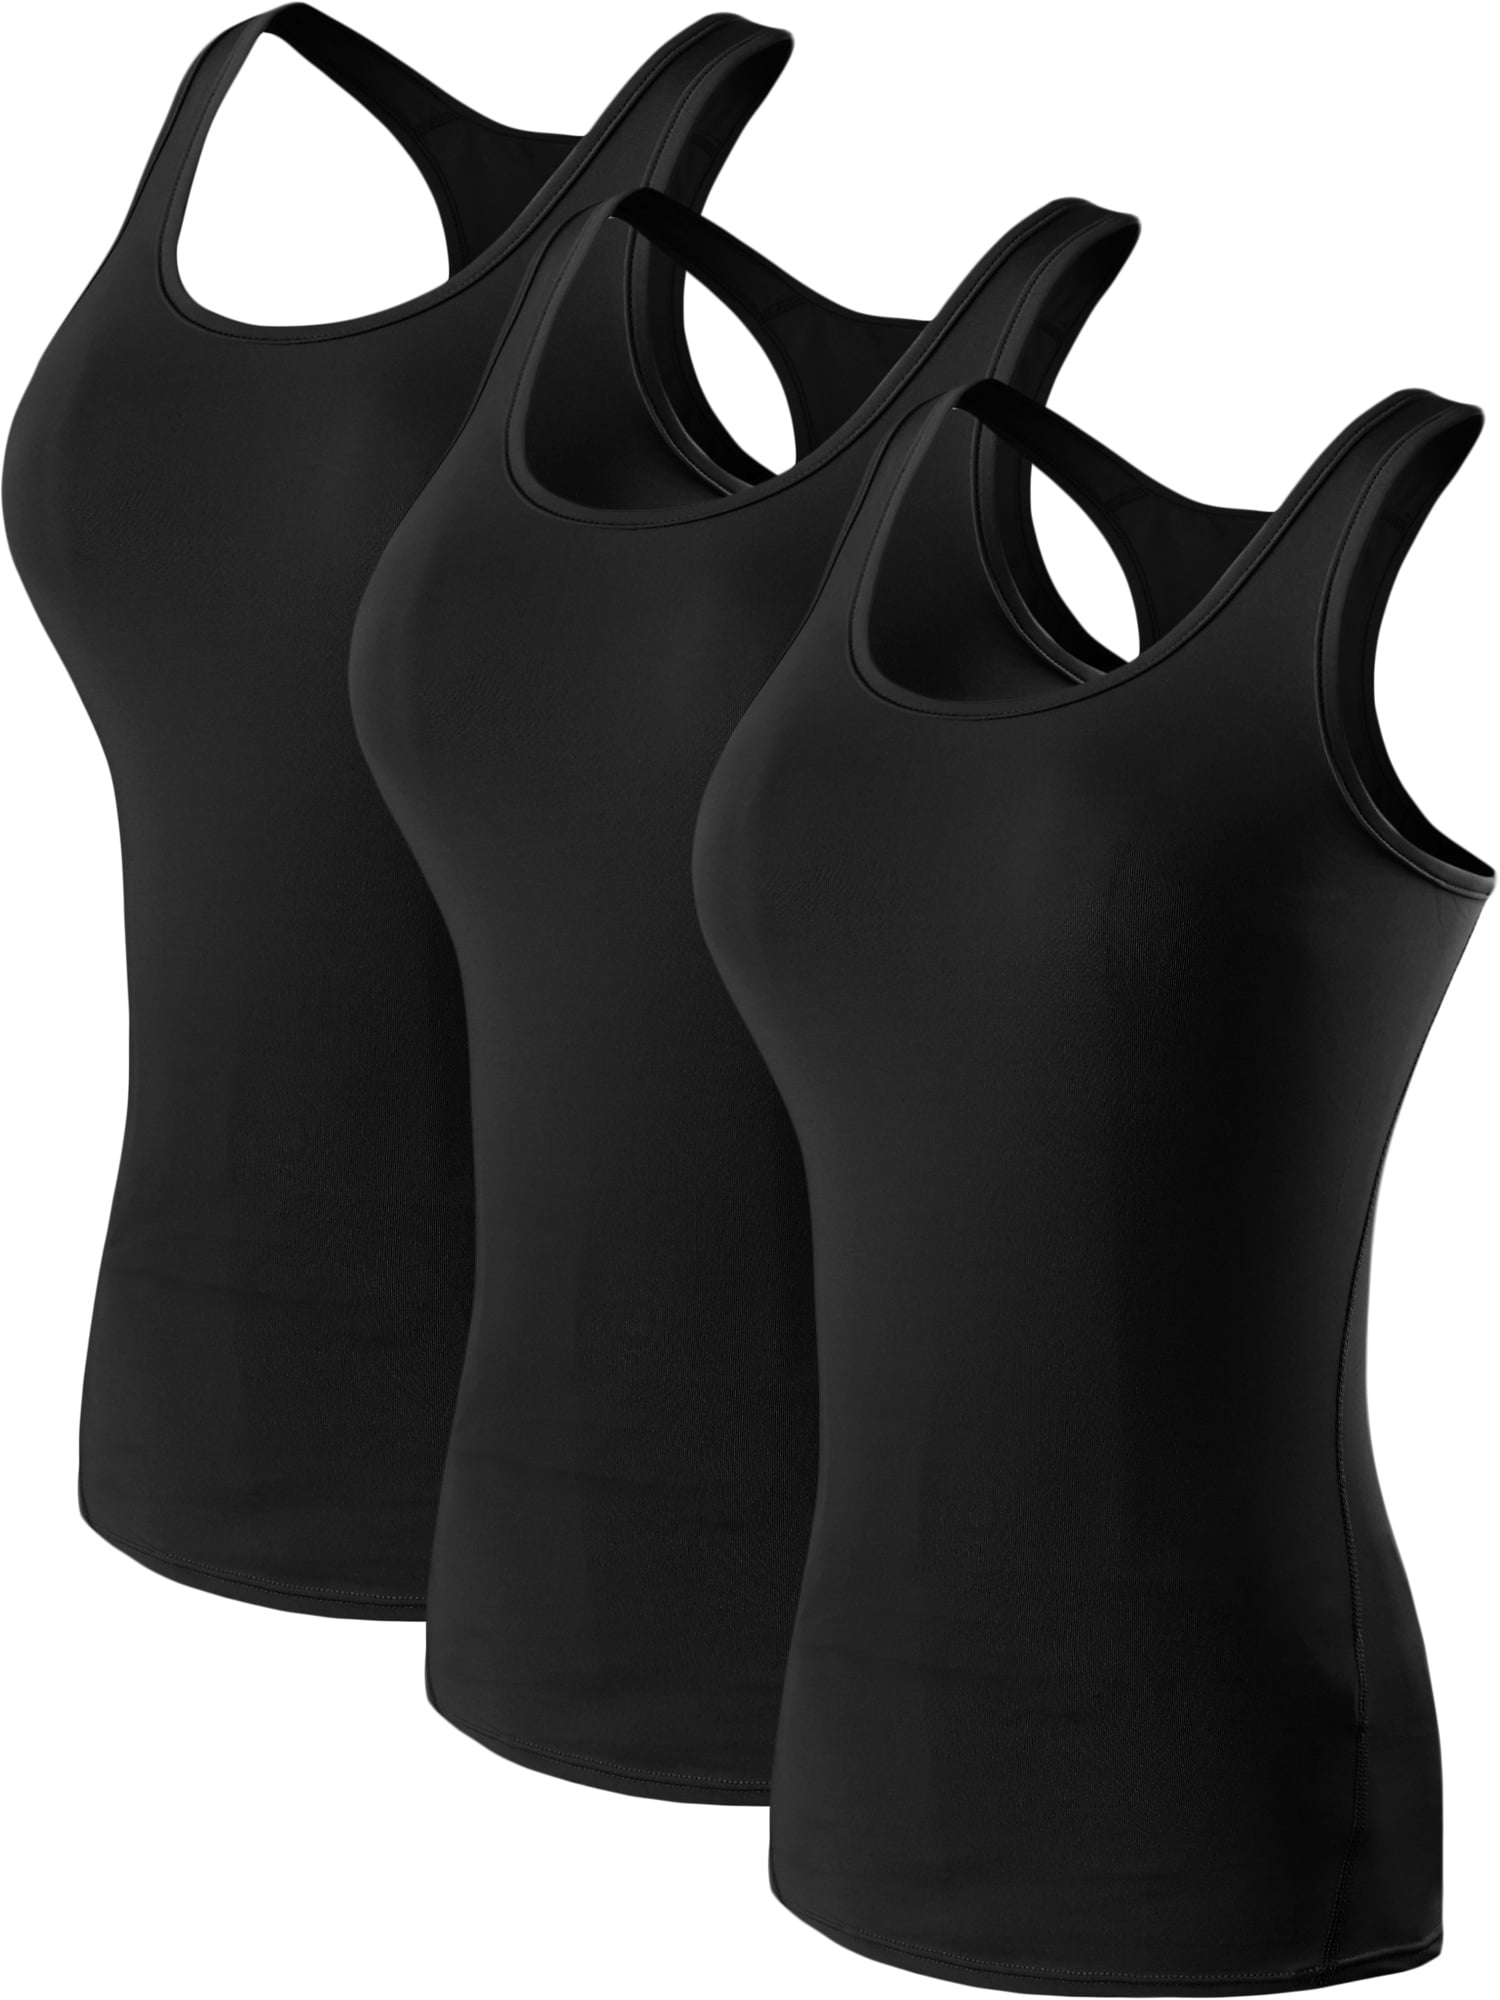 Pack,Black+Gray+White,US 3 Dry NELEUS Size Base Fit Layer Tank Compression Womens Top XS